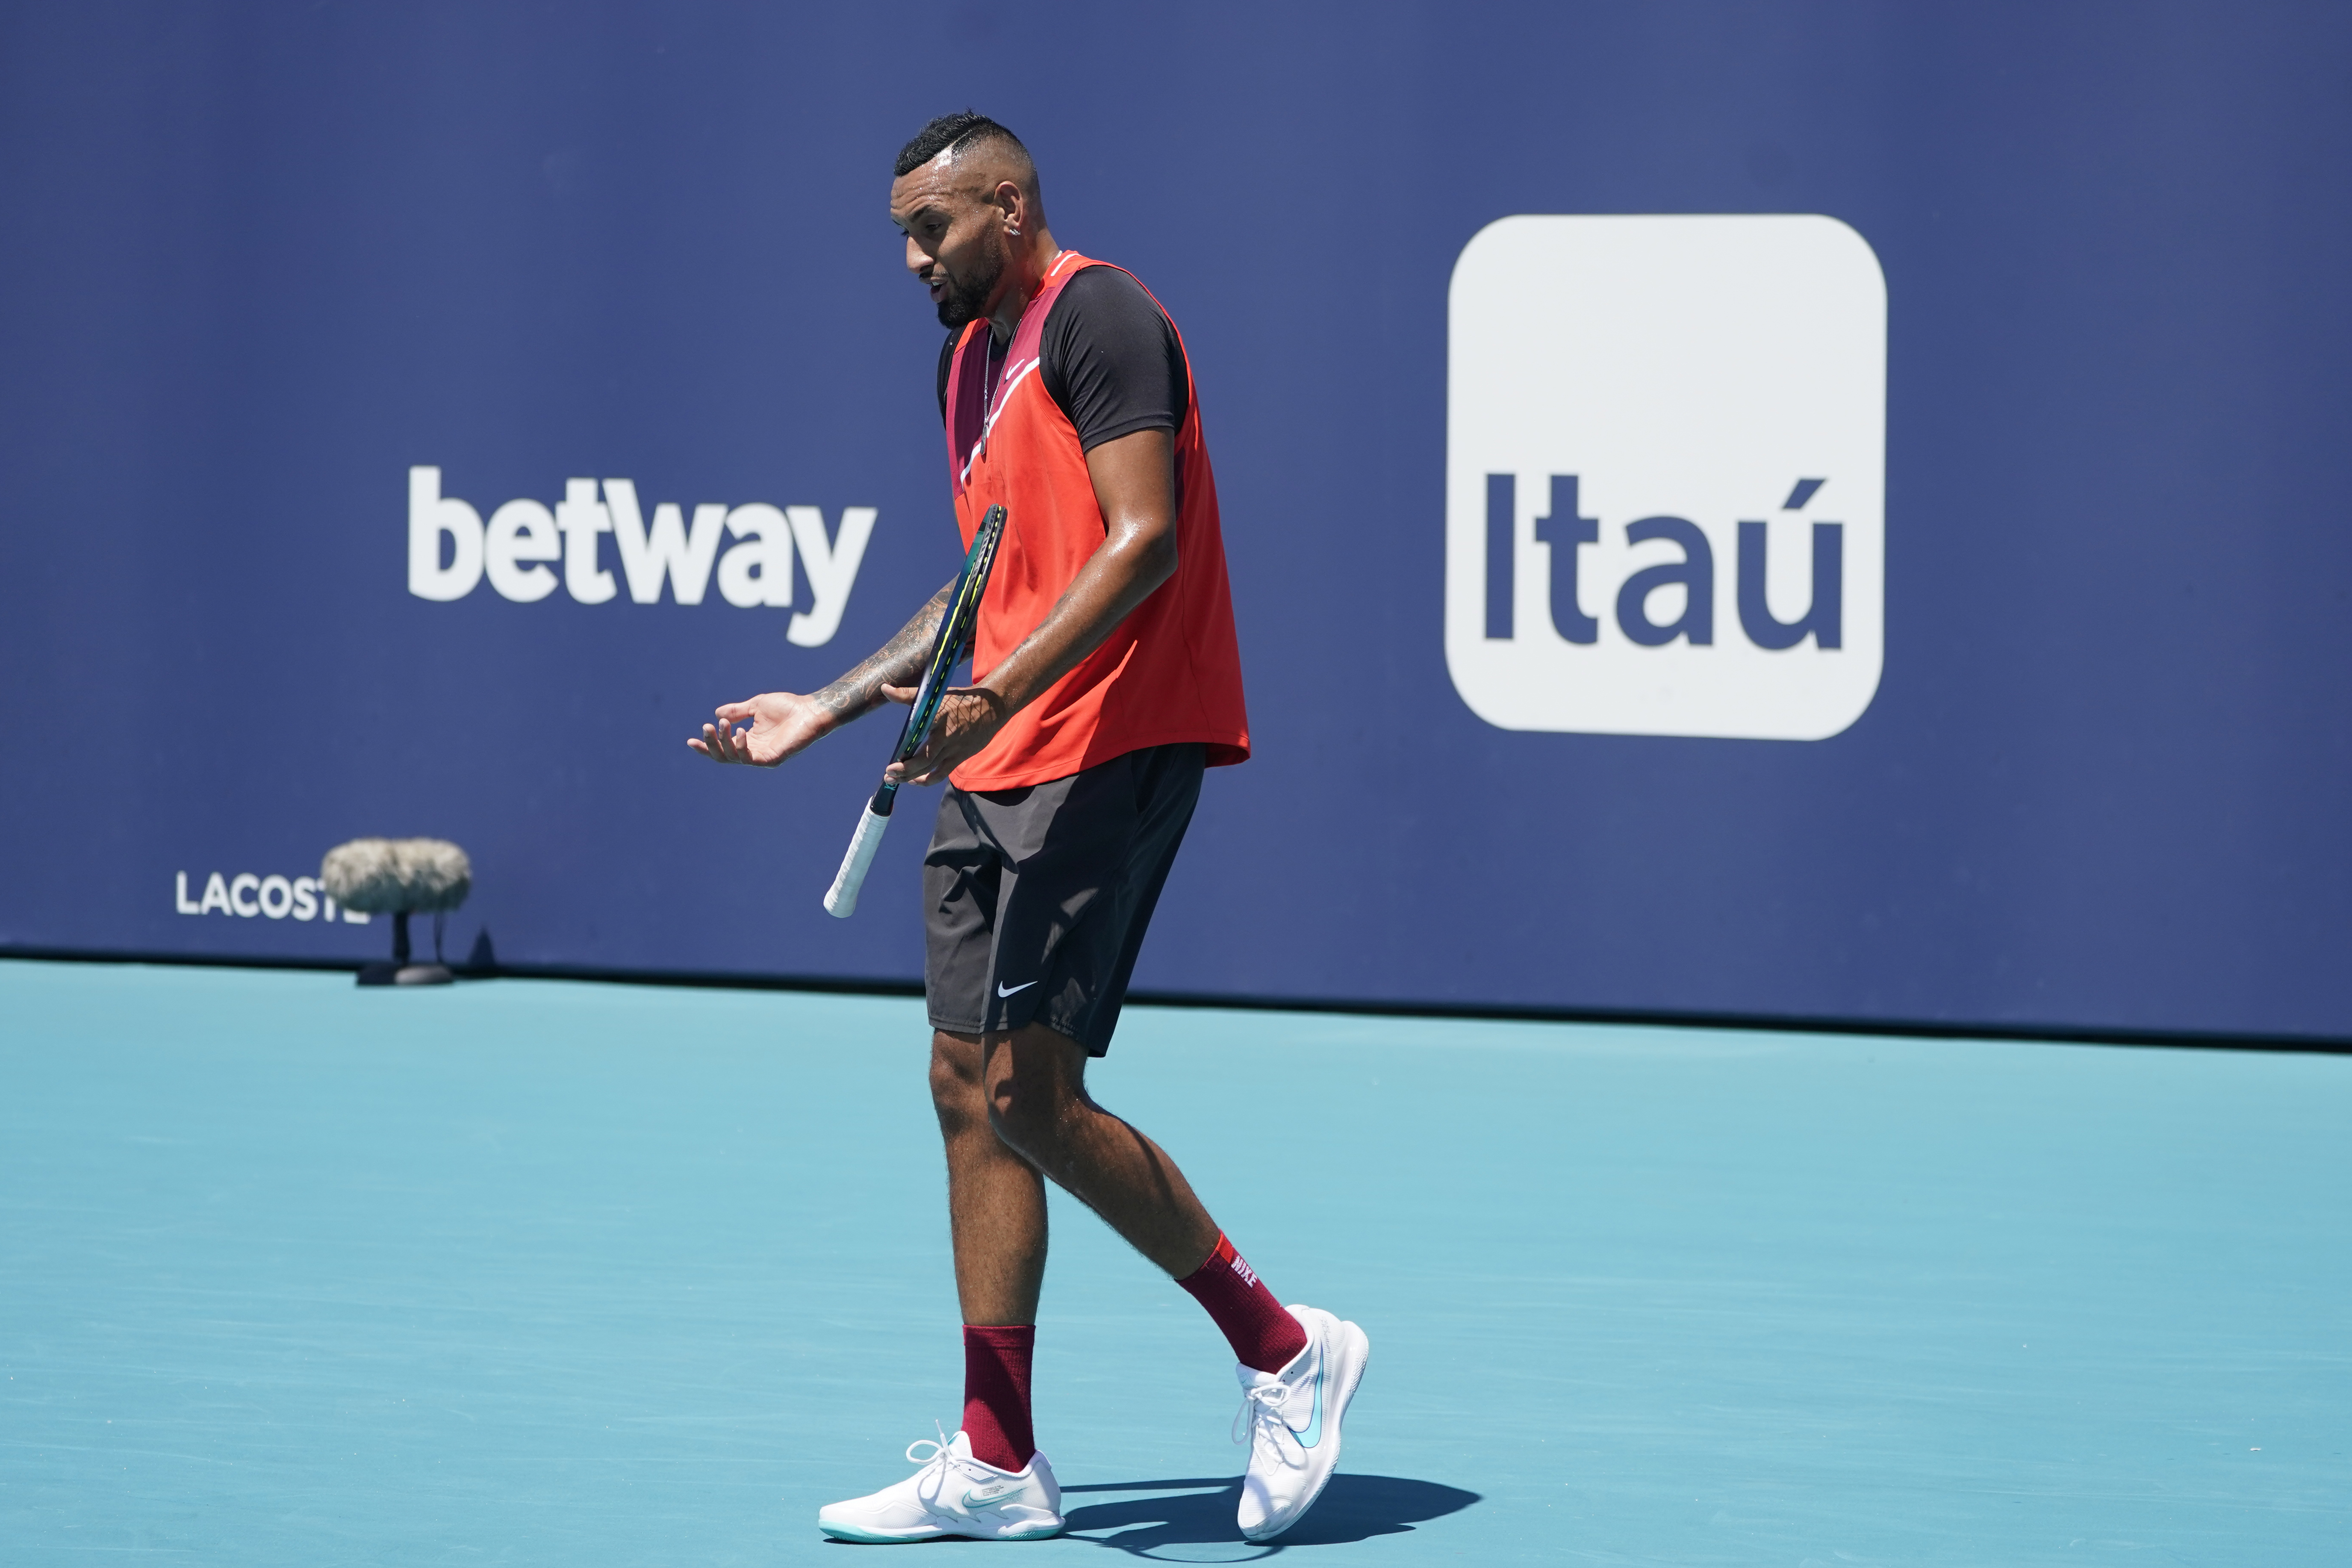 Kyrgios docked point, then game, and falls at Miami Open